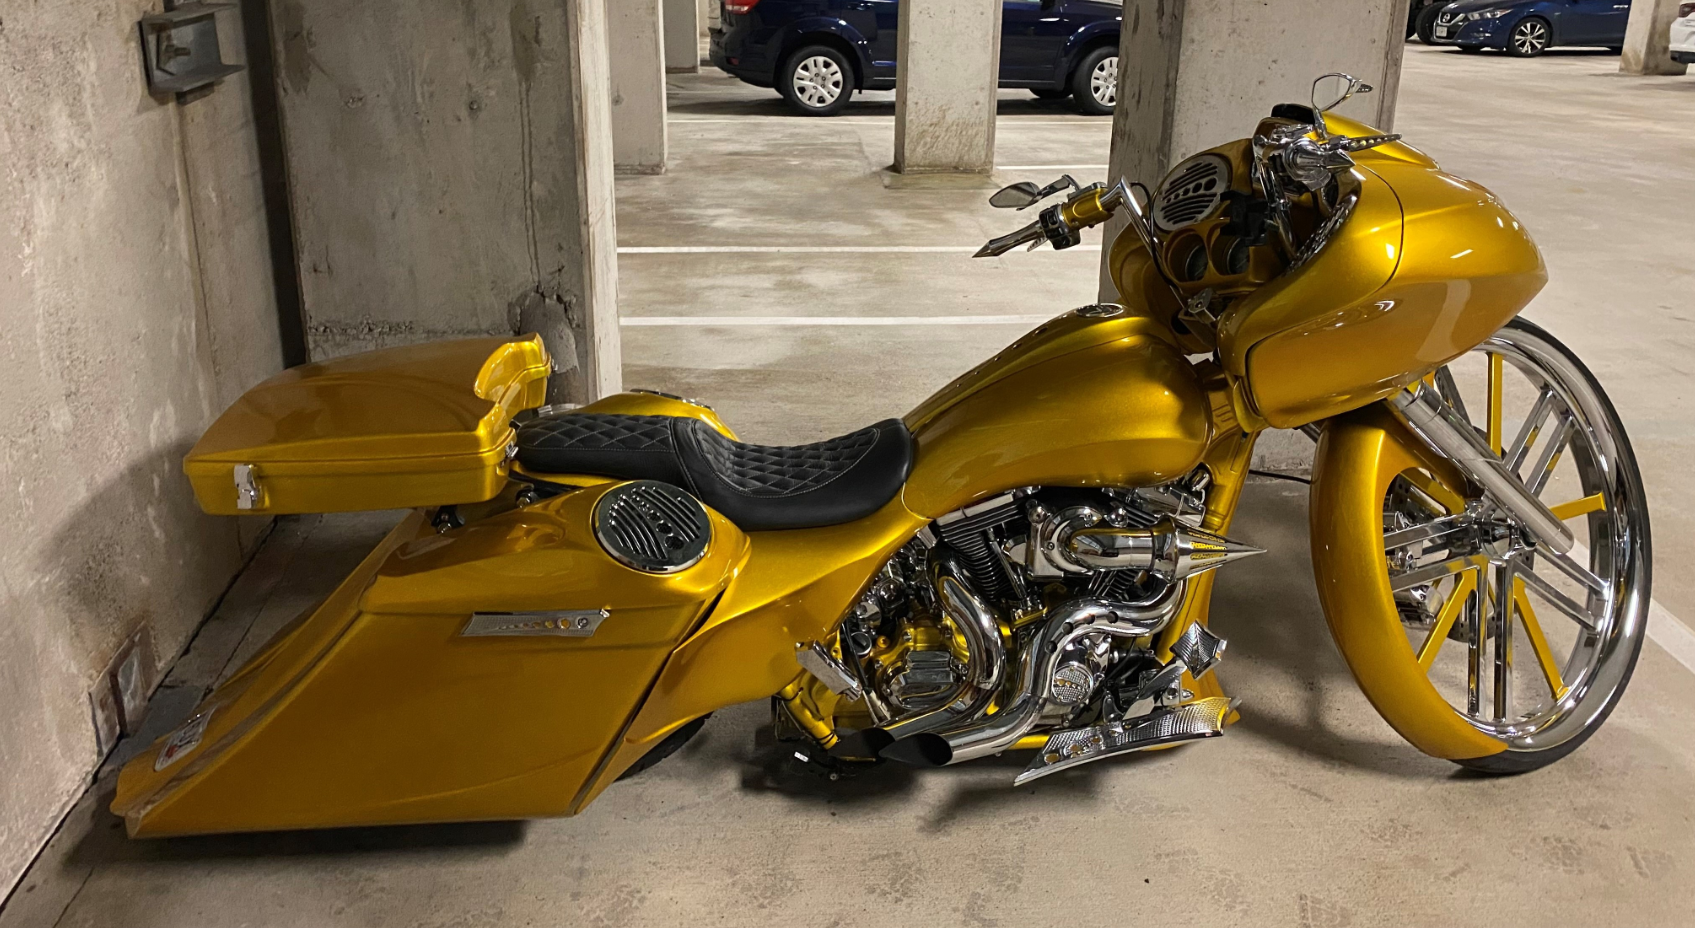 Picture of a customized Harley-Davidson motorcycle.